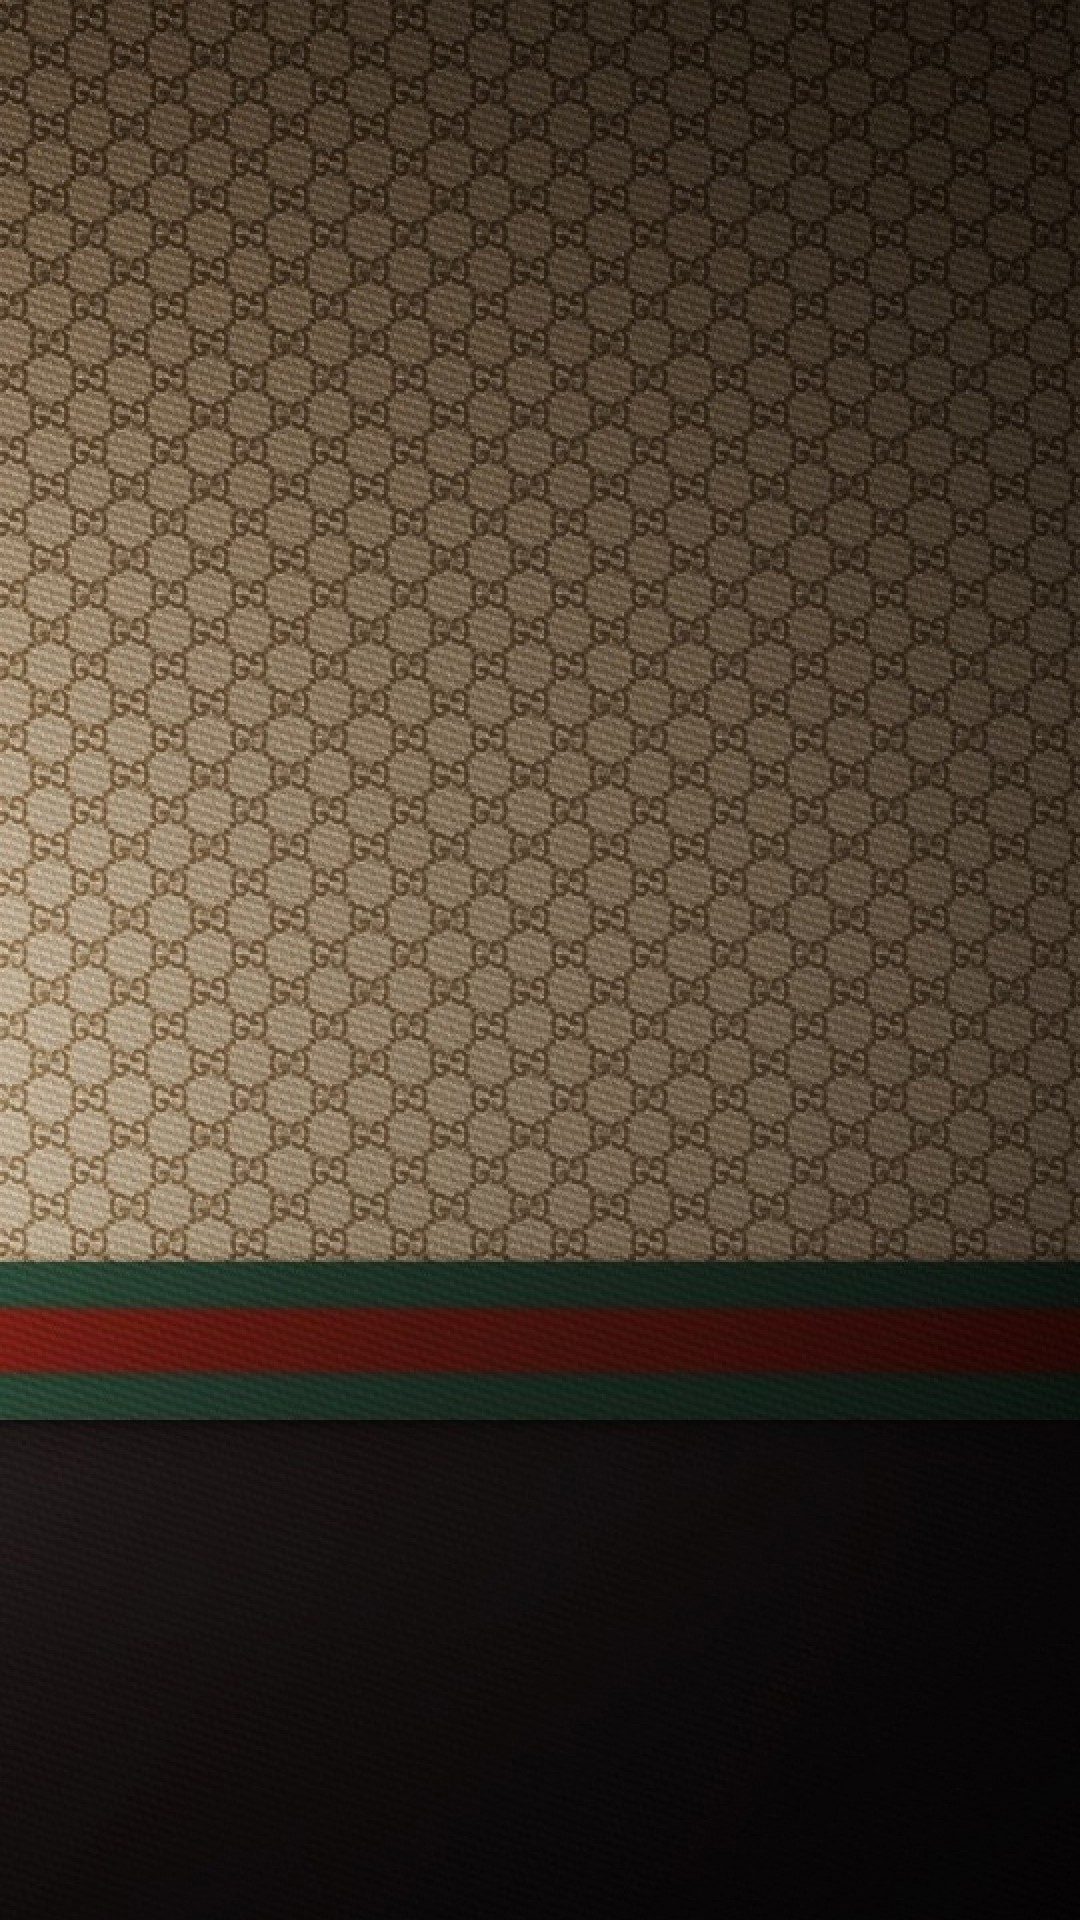 Gucci Patterns Iphone Wallpapers